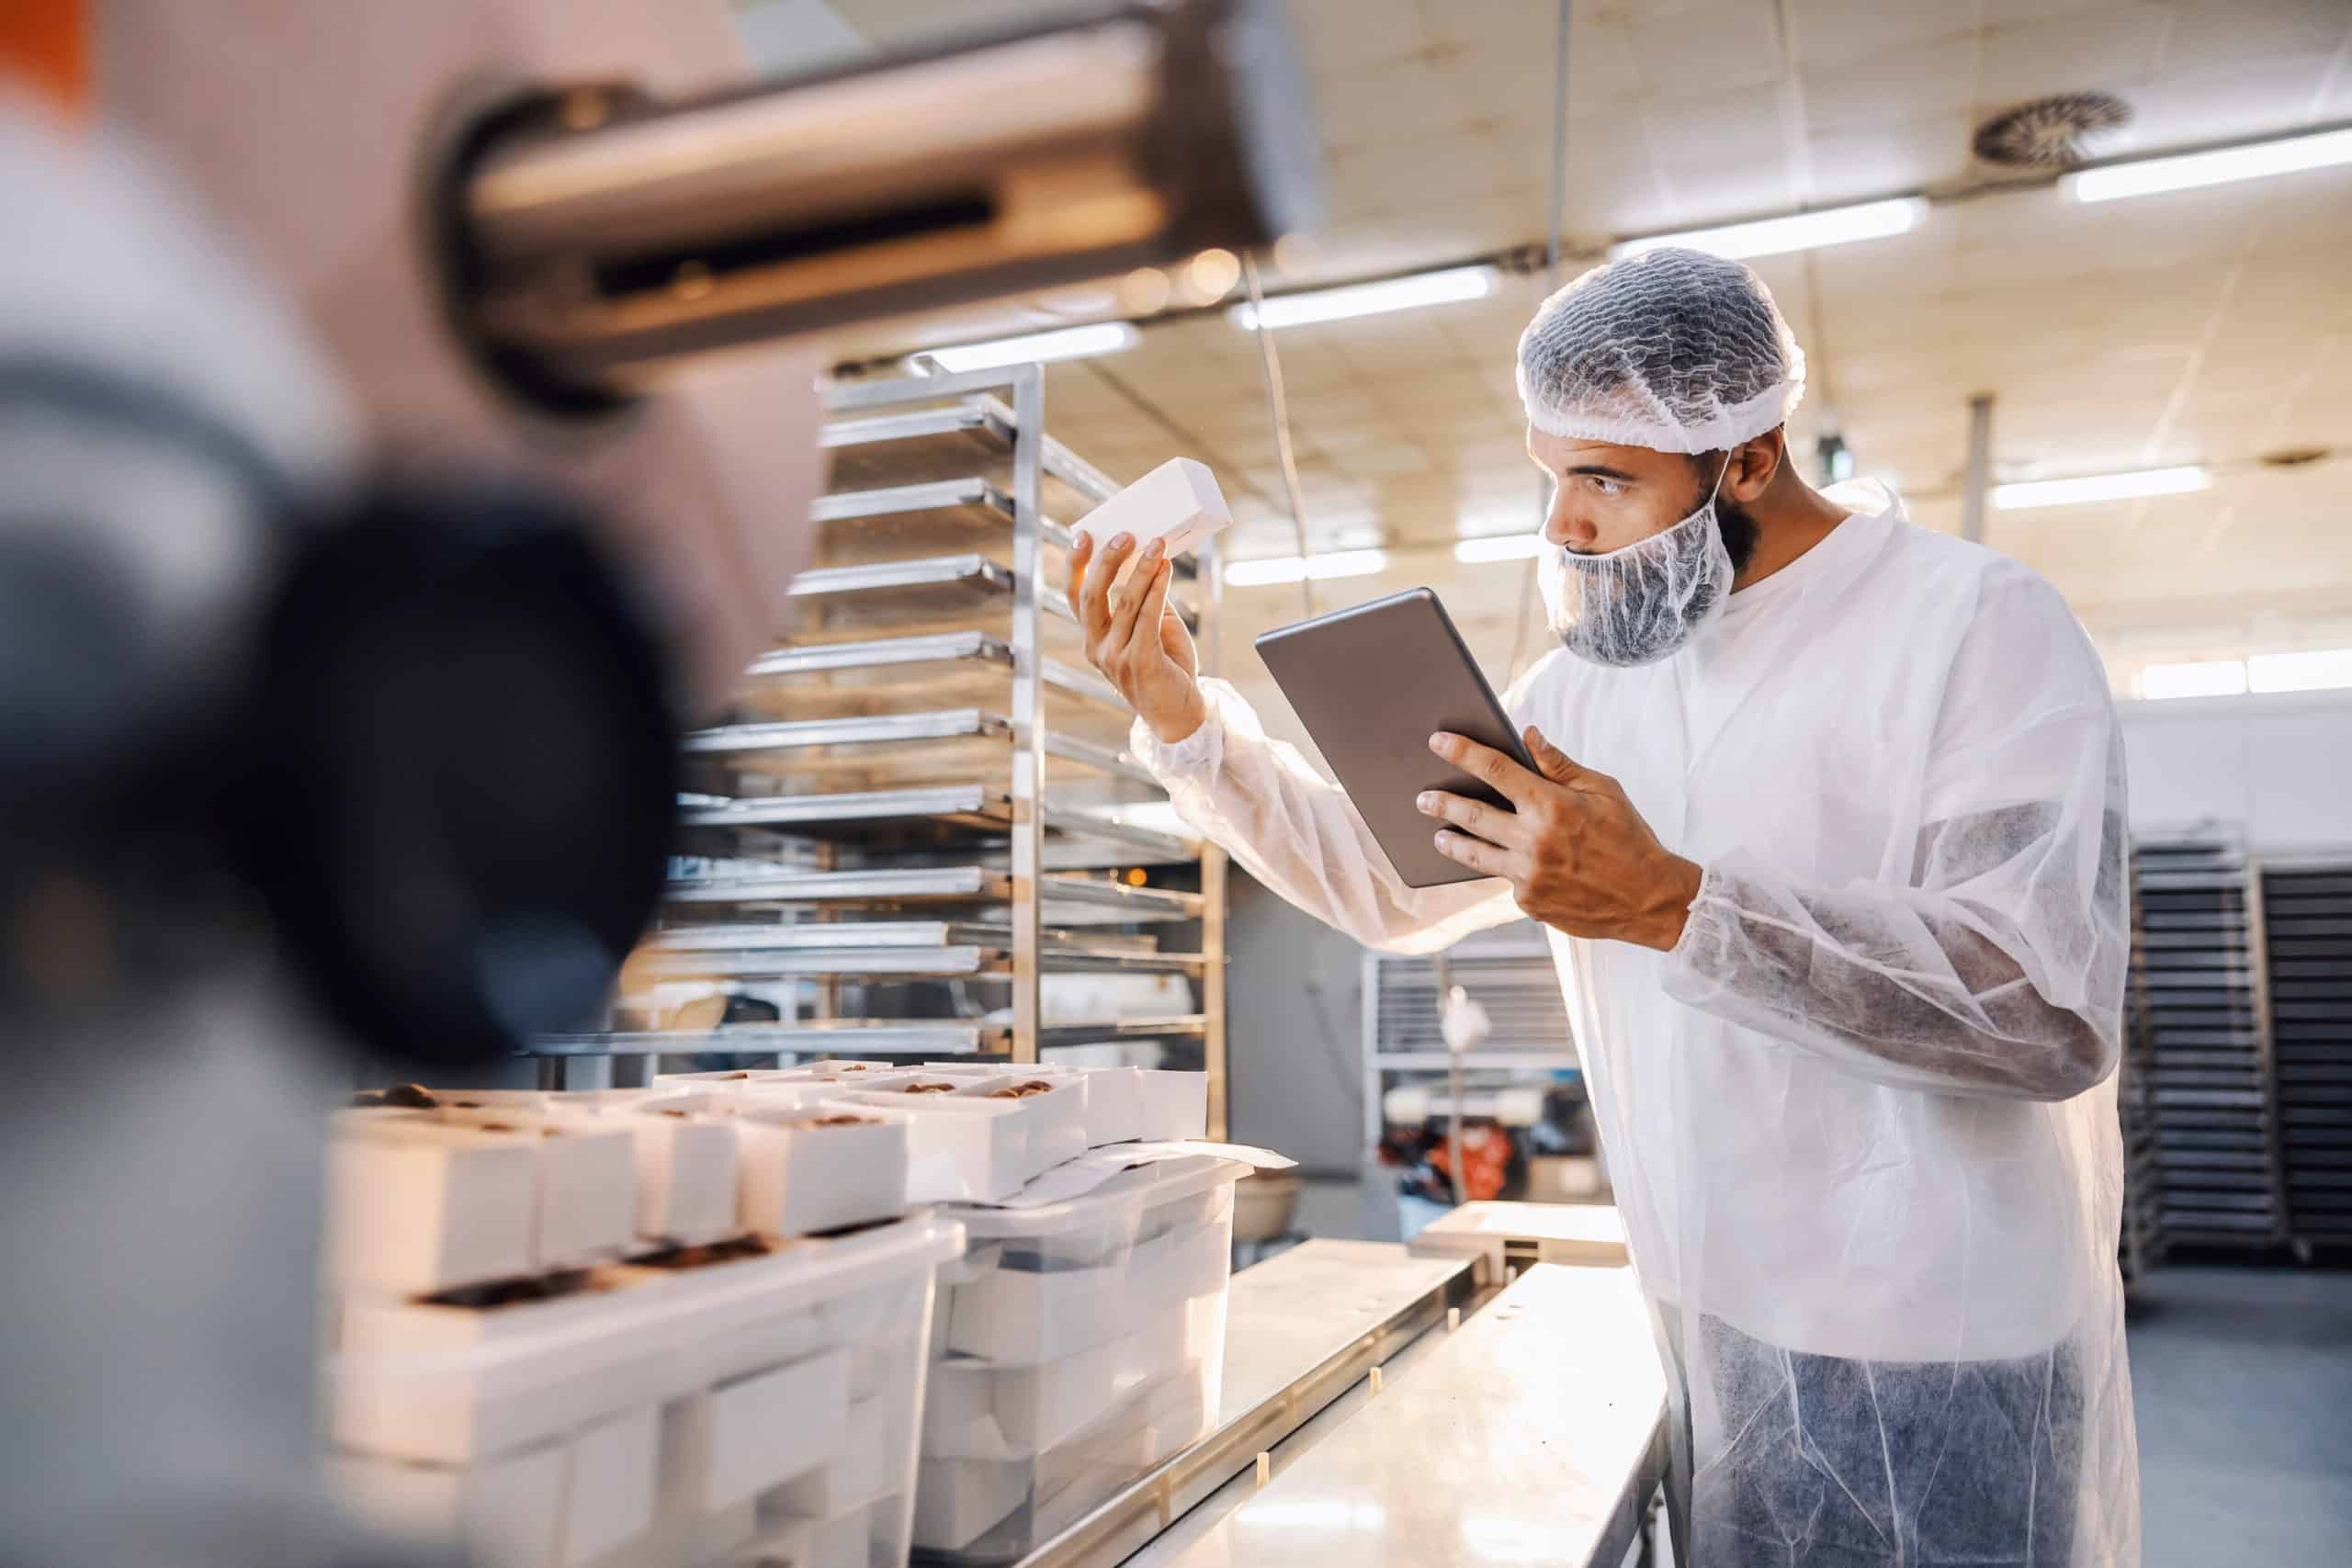 A man with hair nets checking on the quality of a product while holding a tablet to log any deviations